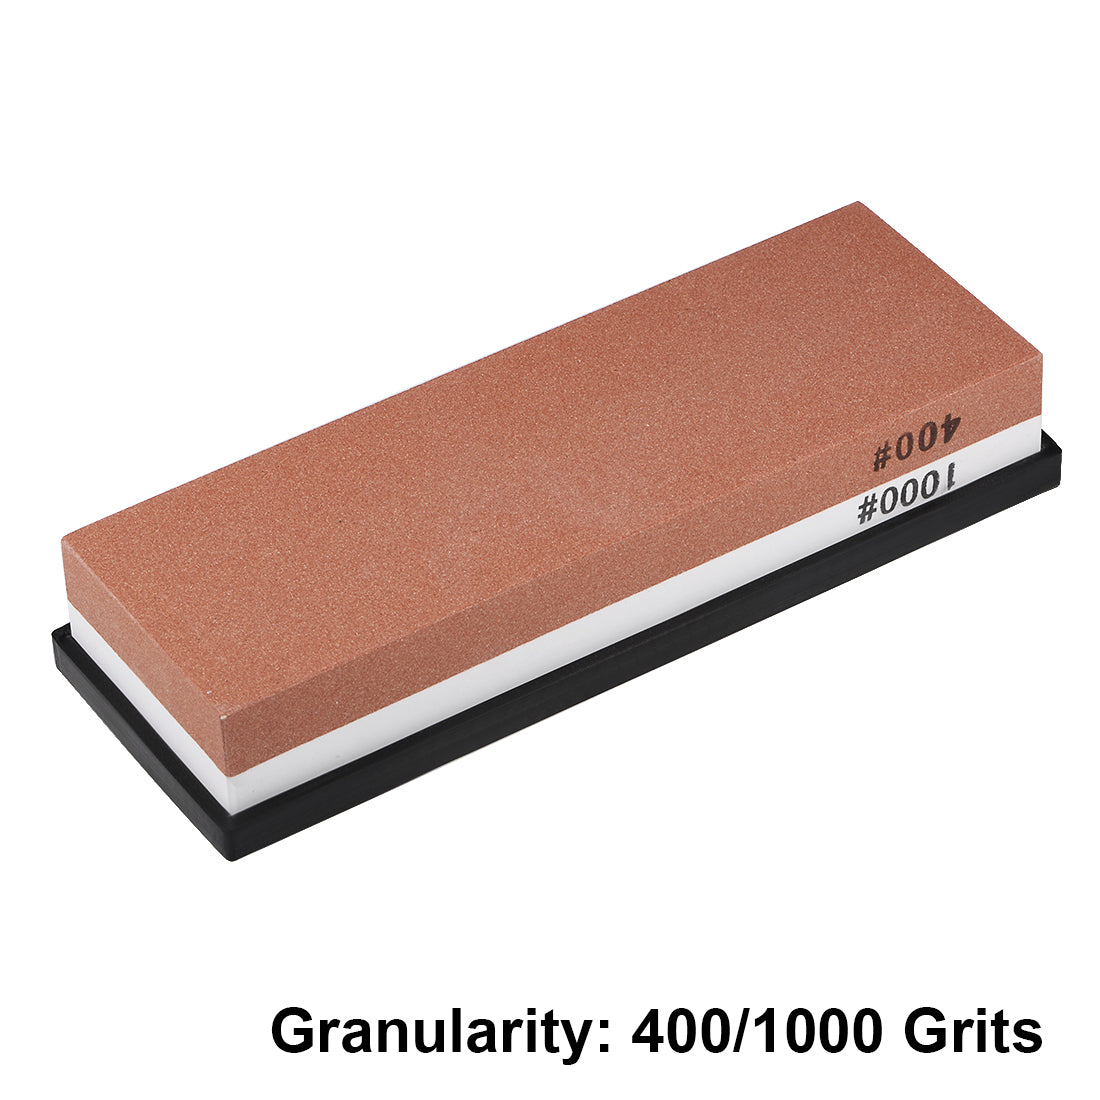 uxcell Uxcell Double-Sided Whetstone Knives Sharpener Sharpening Stone 400/1000 Grit for Scissors Razors Carving Tool